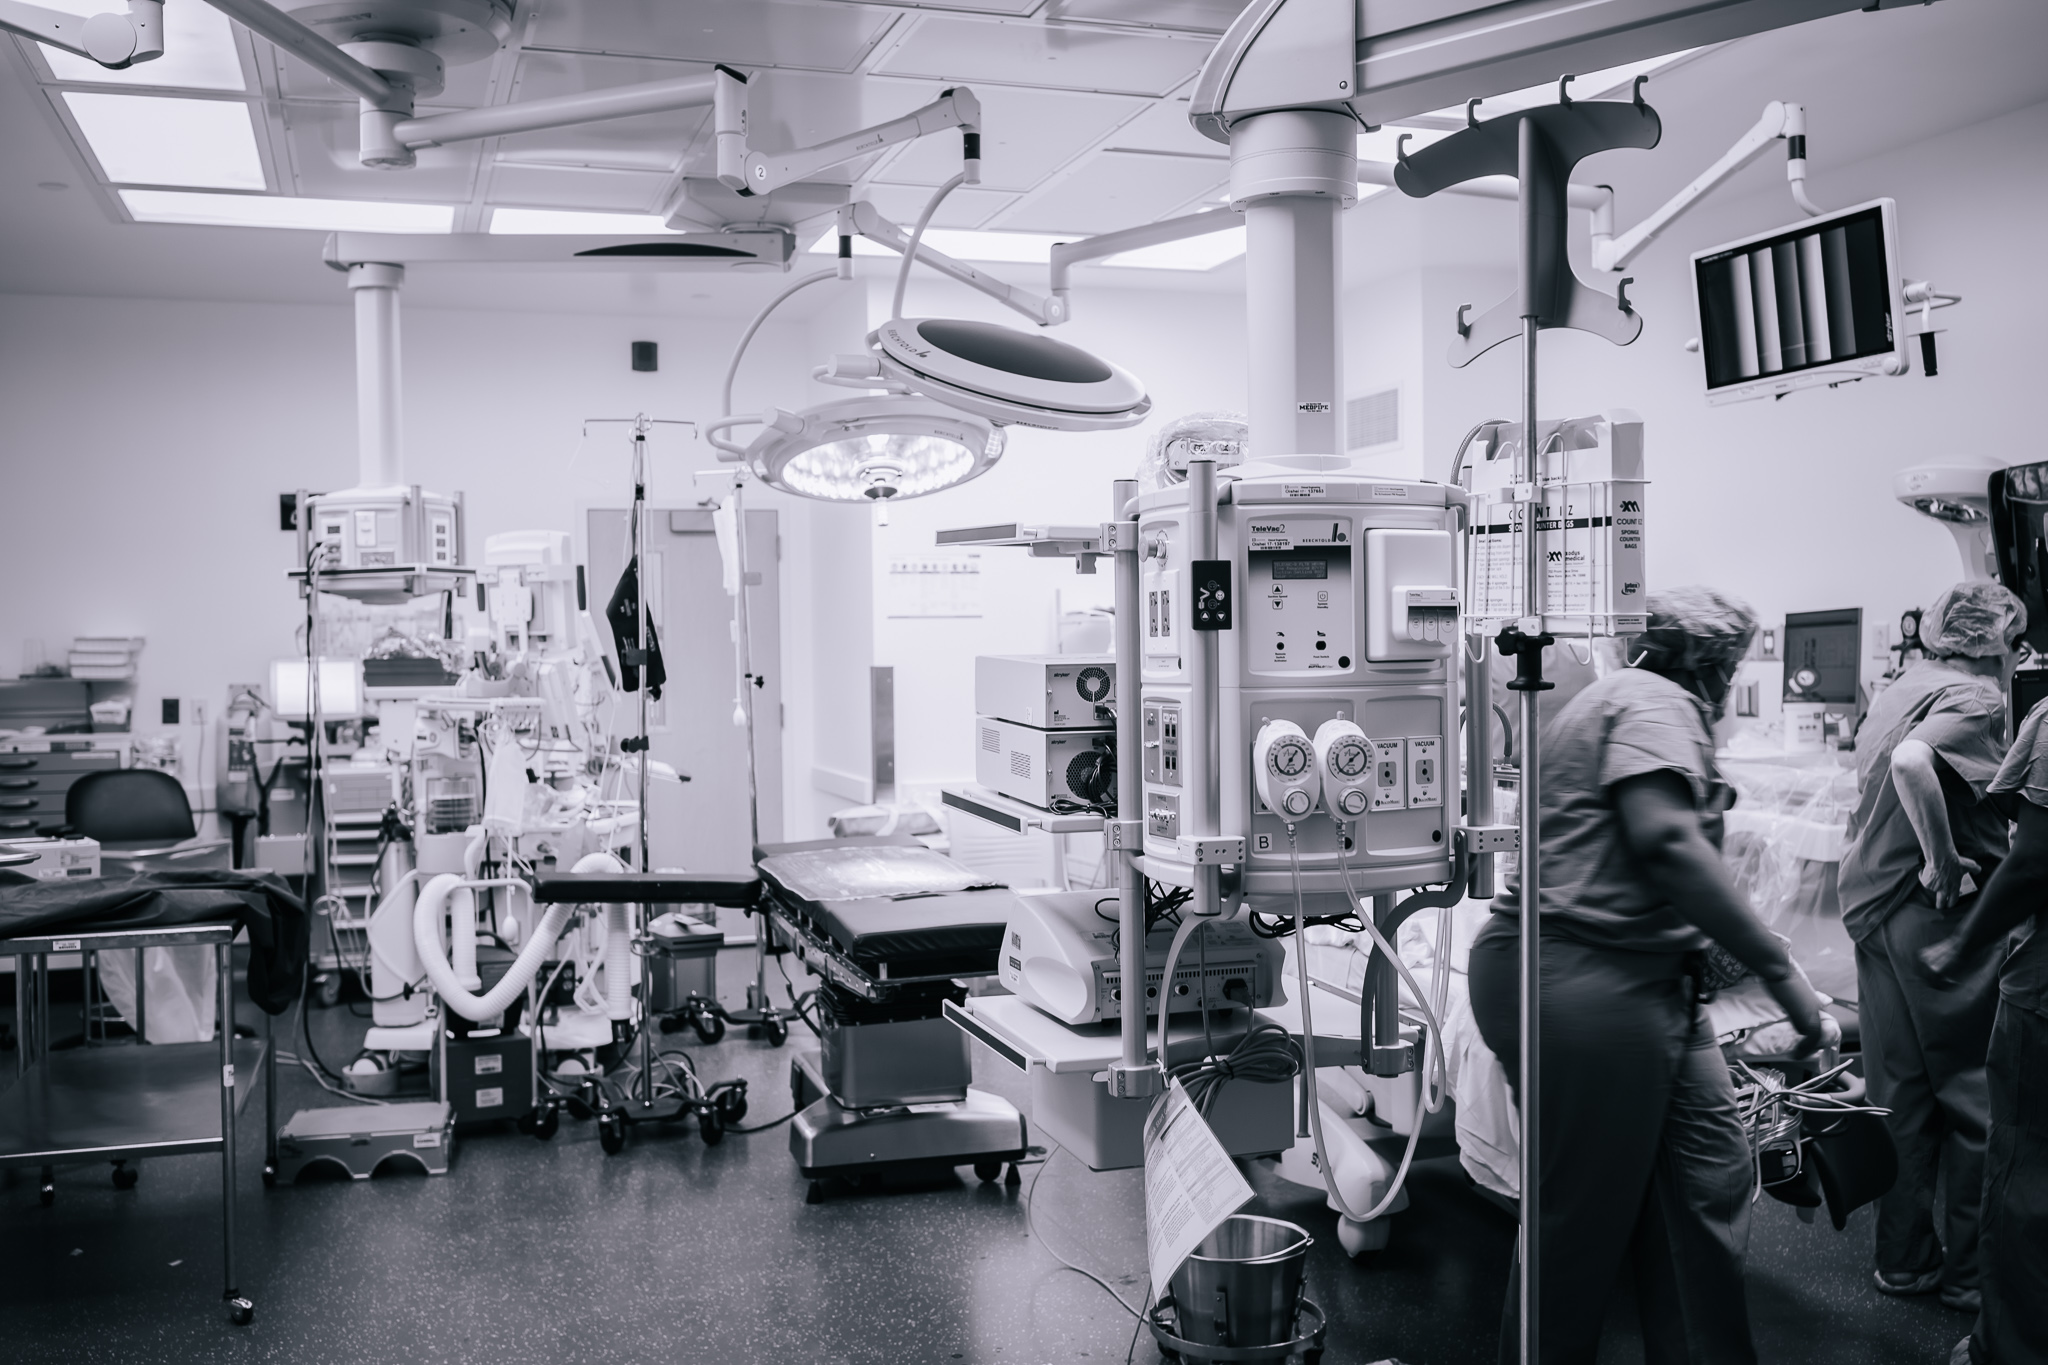 black and white image of a labor and Delivery Operating room.